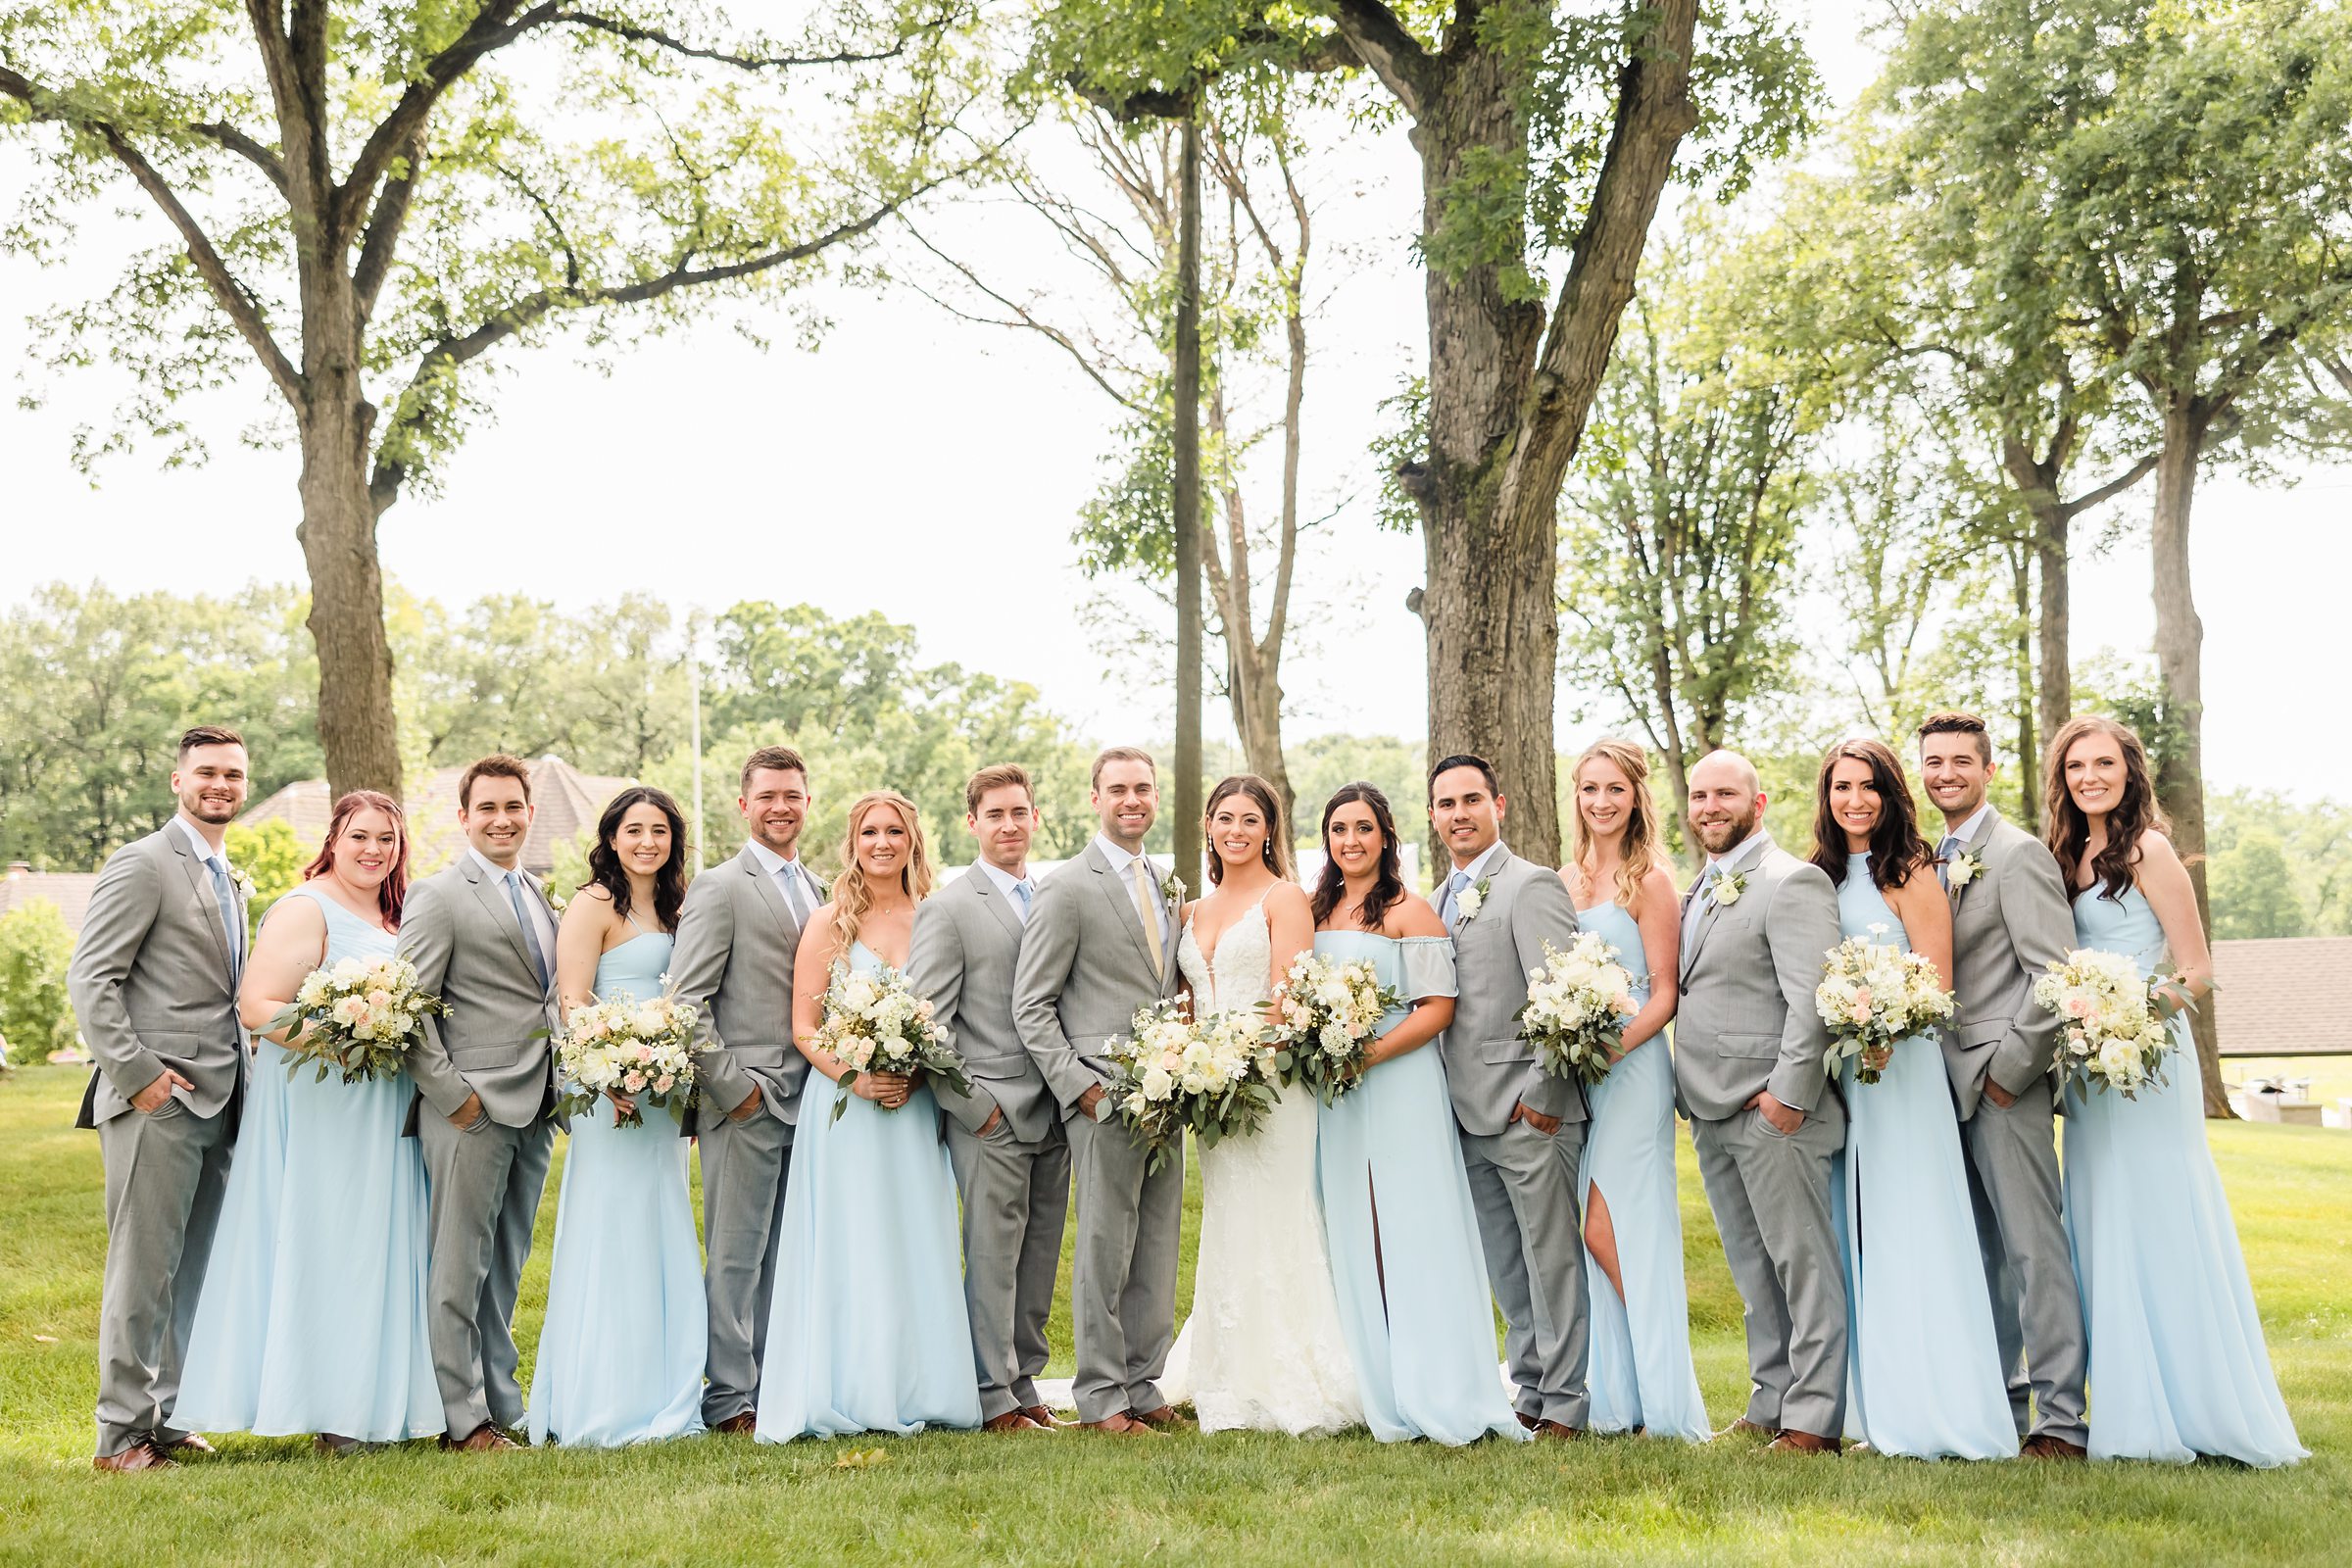 Bridal Party during a wedding at the Monte Bello Estate in Lemont, Illinois.